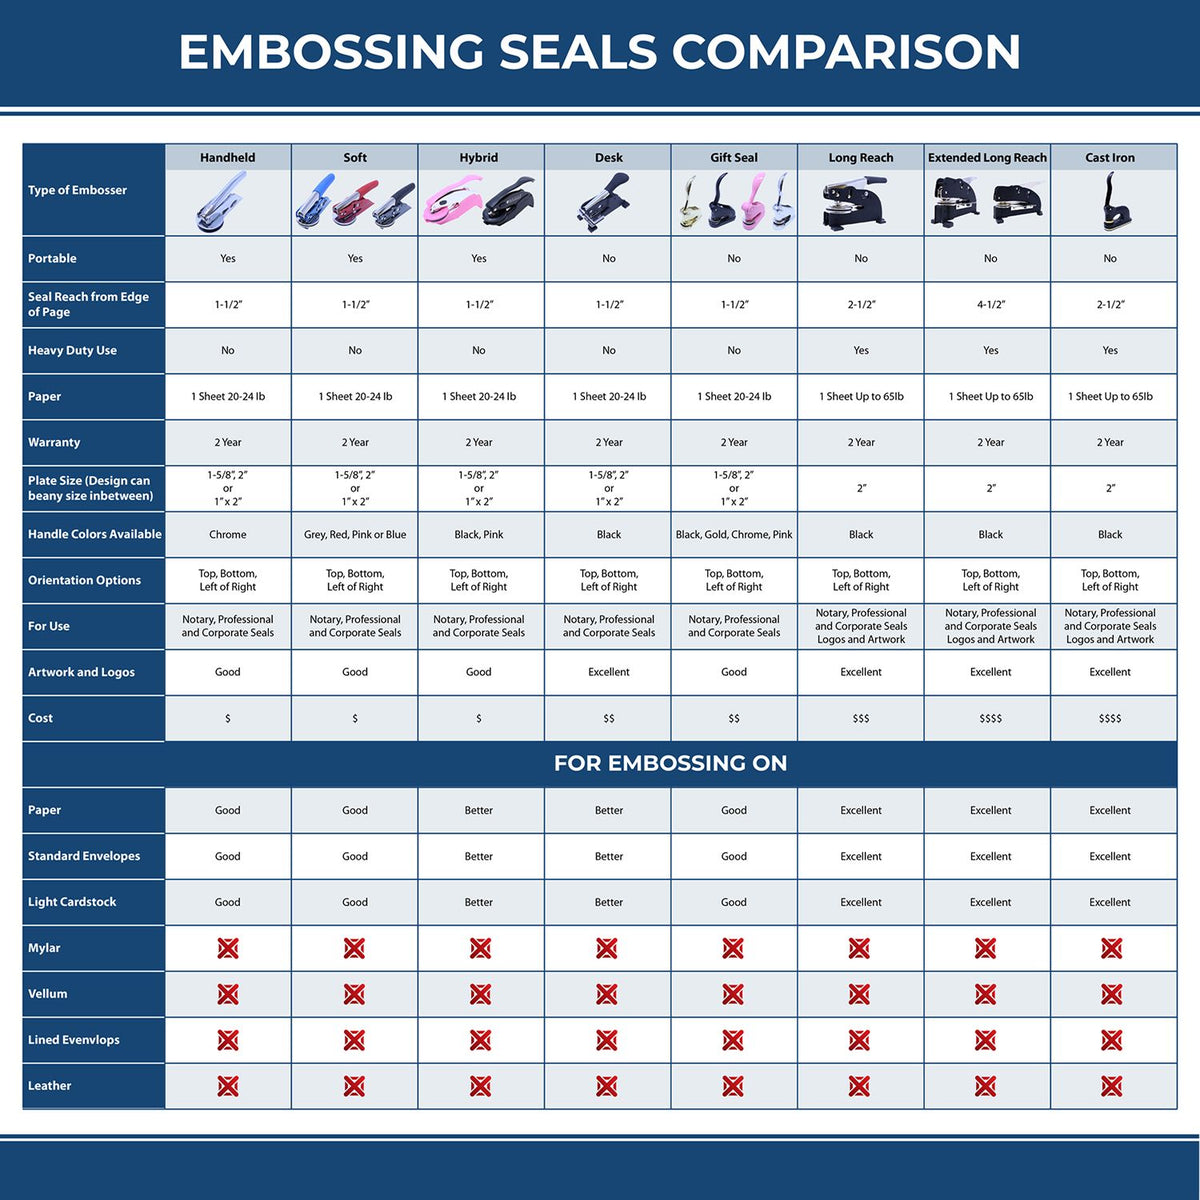 A comparison chart for the different types of mount models available for the Handheld Iowa Professional Geologist Embosser